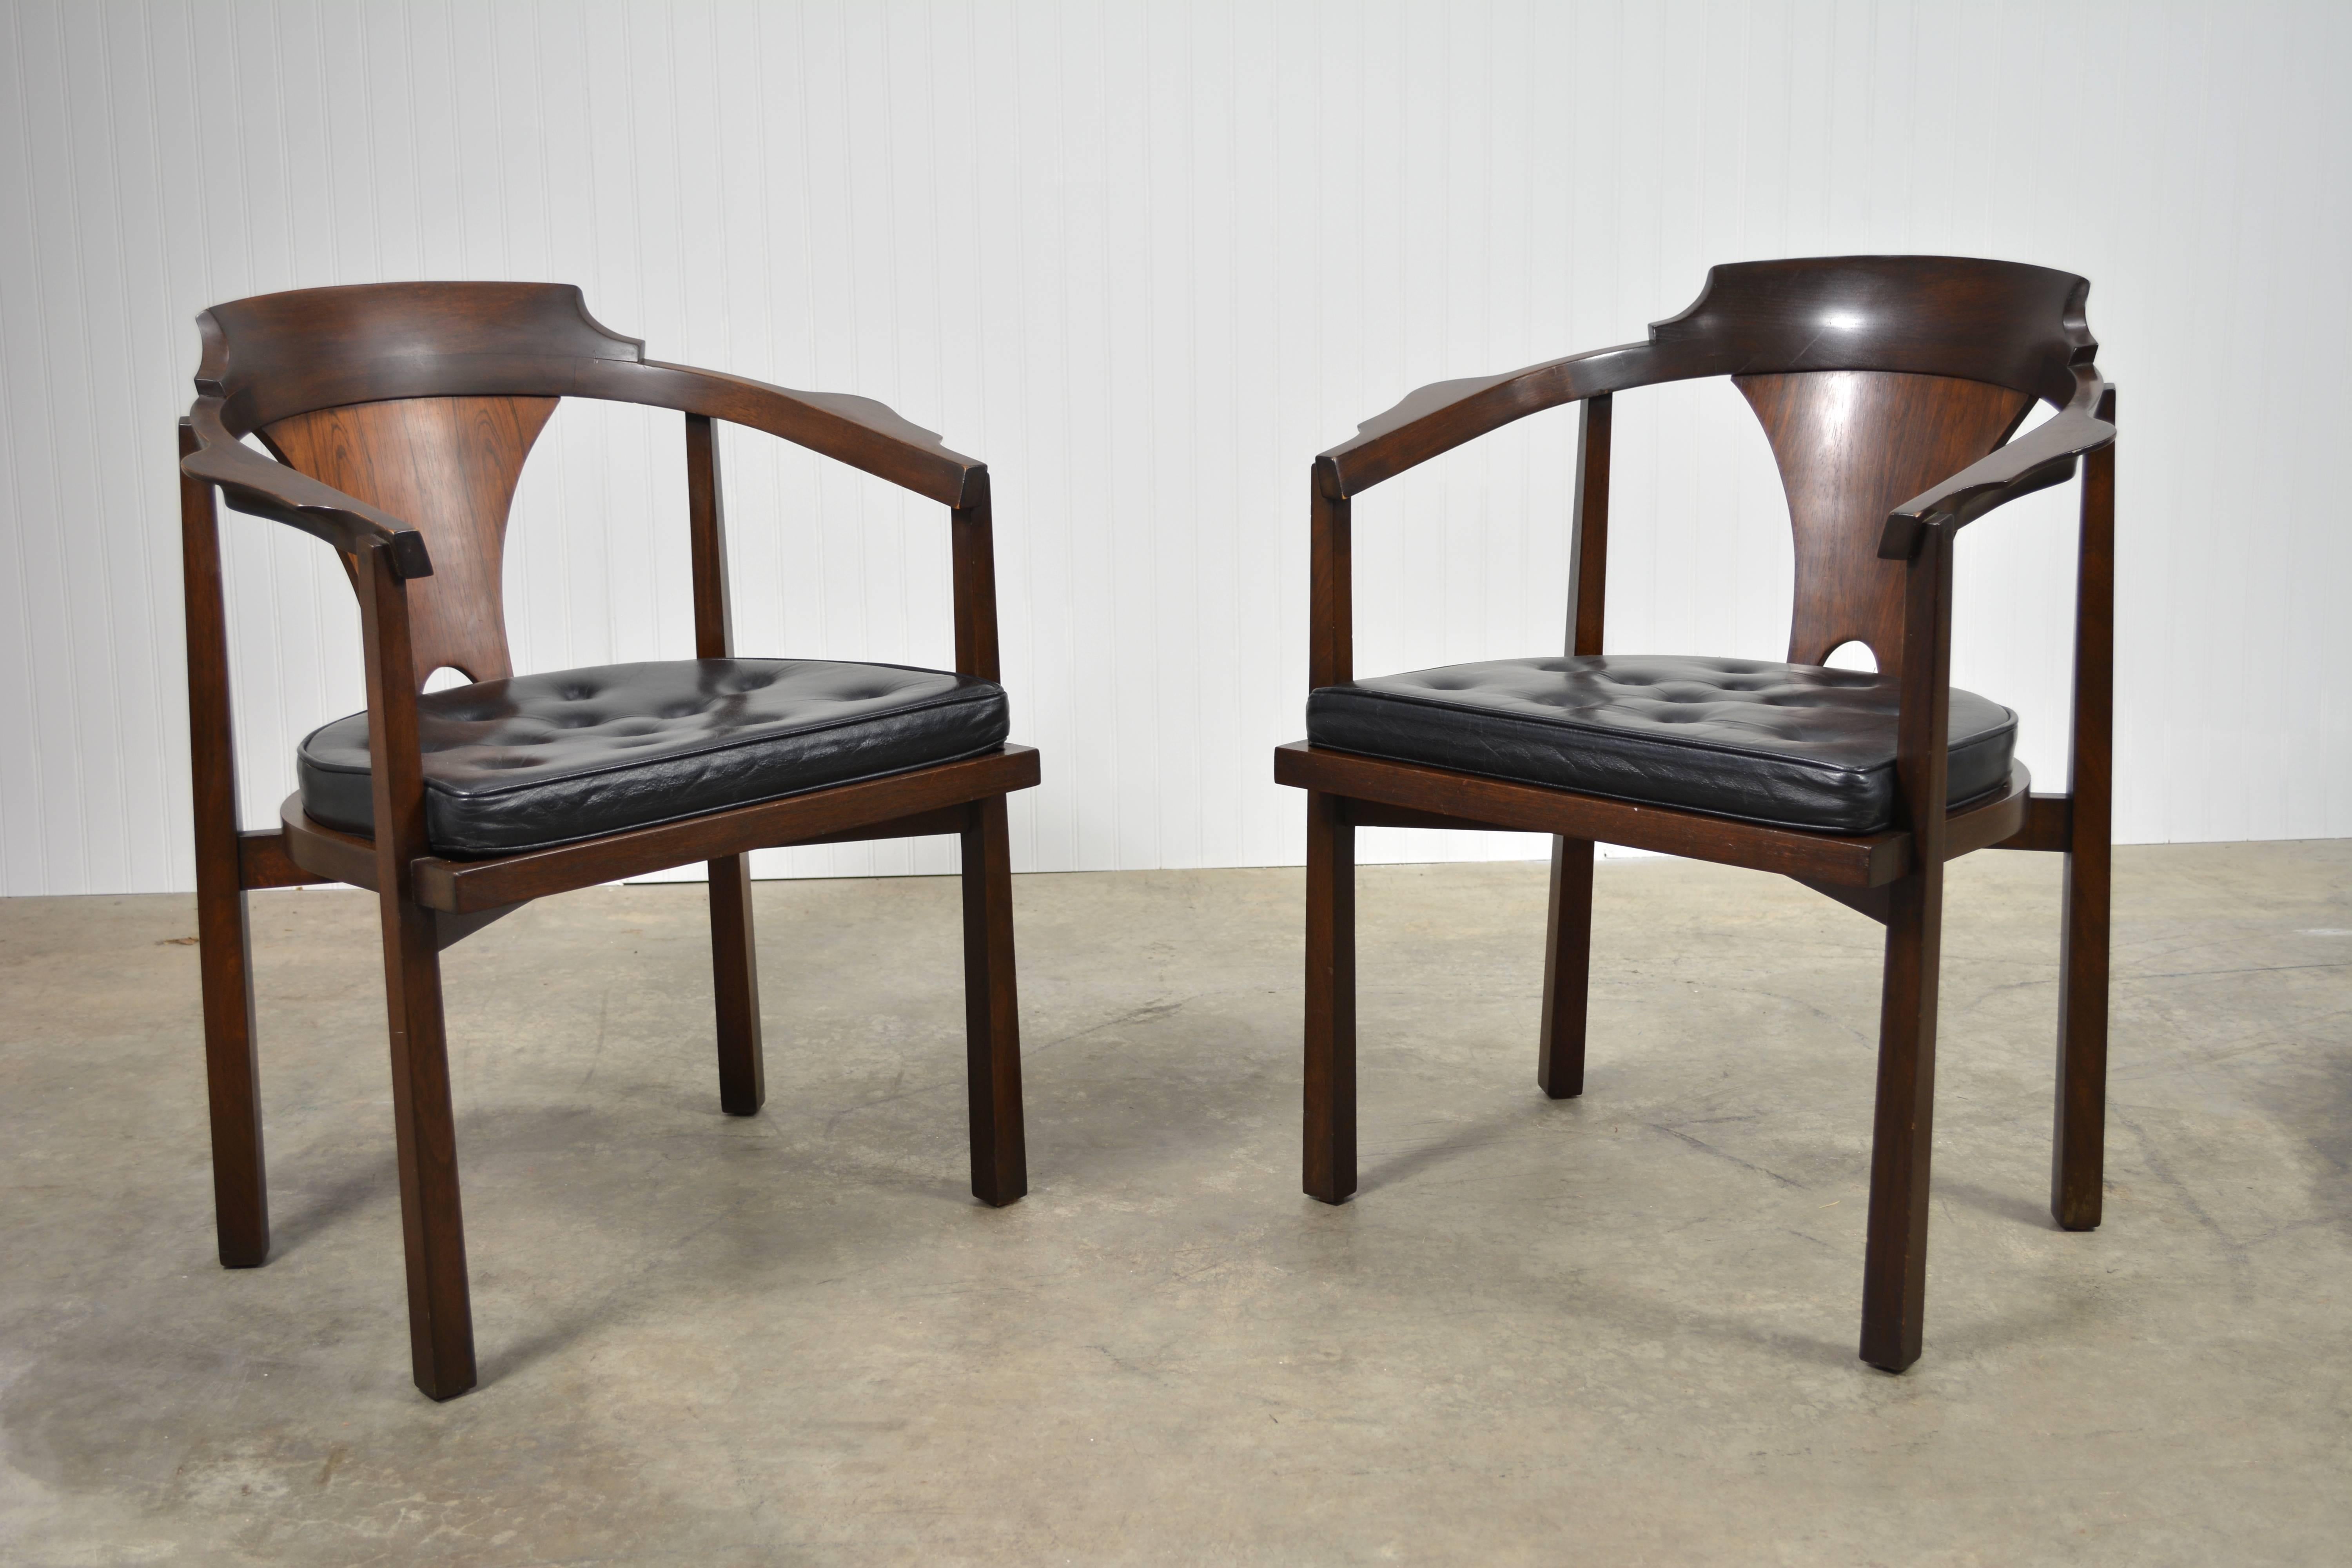 A beautifully sculpted pair of horseshoe chairs by Edward Wormley for Dunbar. Rosewood and mahogany construction. Original finish and upholstery. Available individually, as well.